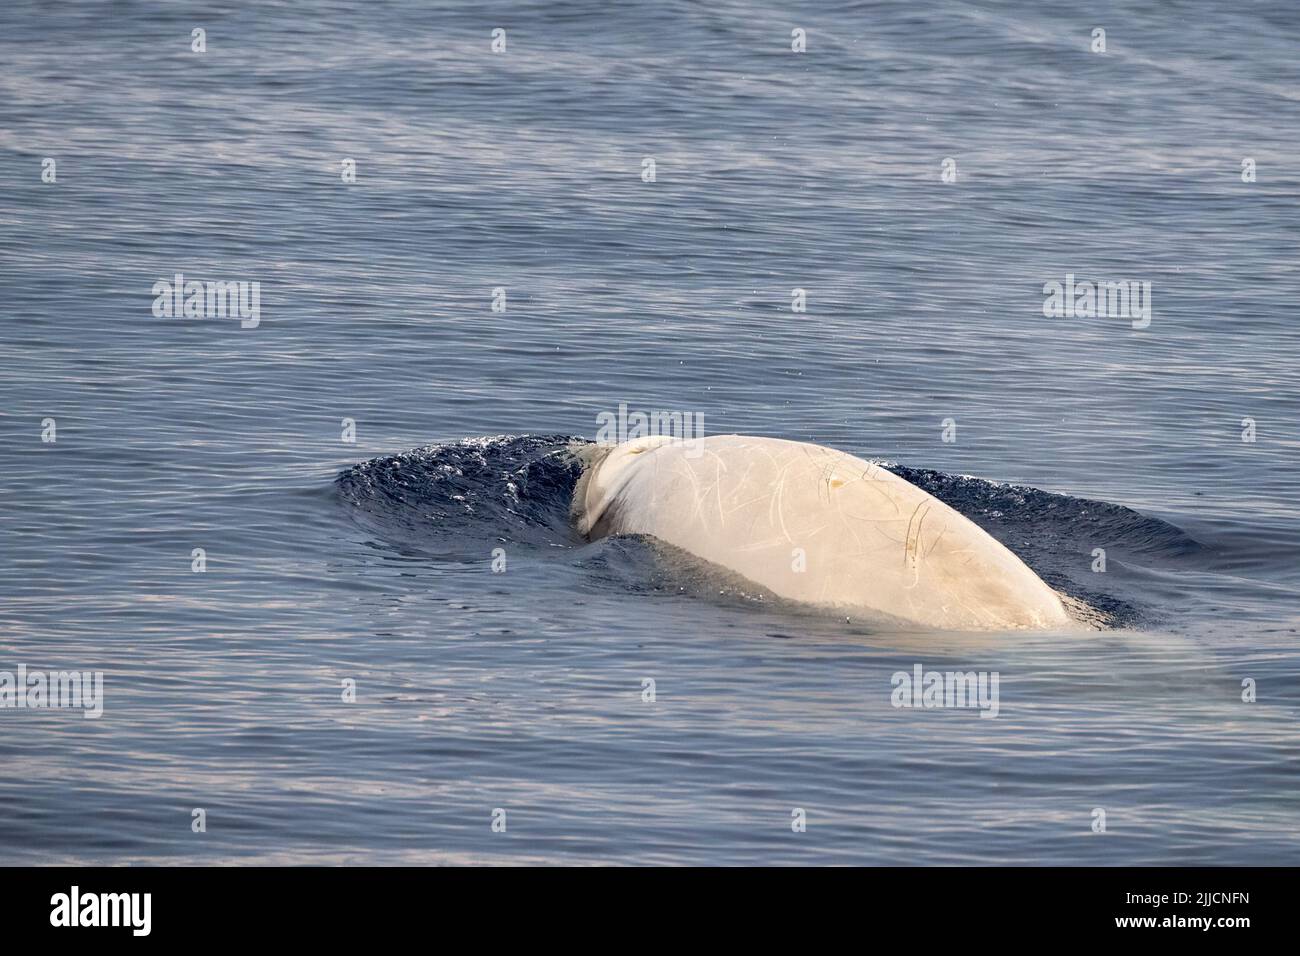 white albino cuvier beaked whale close up portrait on calm sea surface Stock Photo